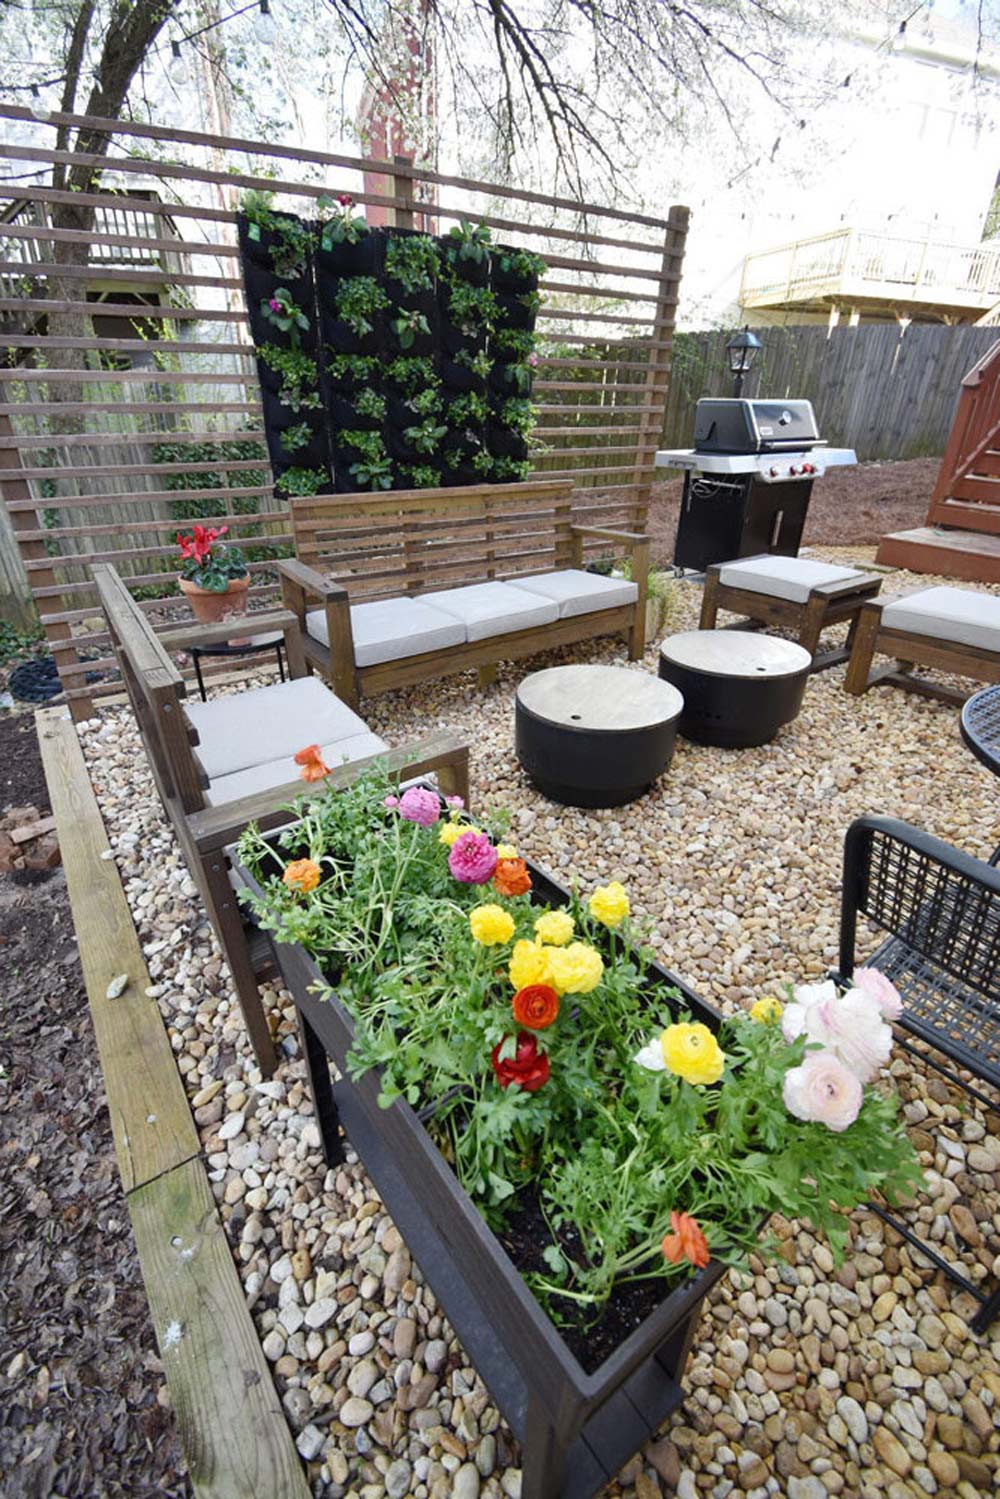 Backyard outdoor patio with wood and canvas outdoor furniture, bed of color flowers, gravel ground, and black grill.